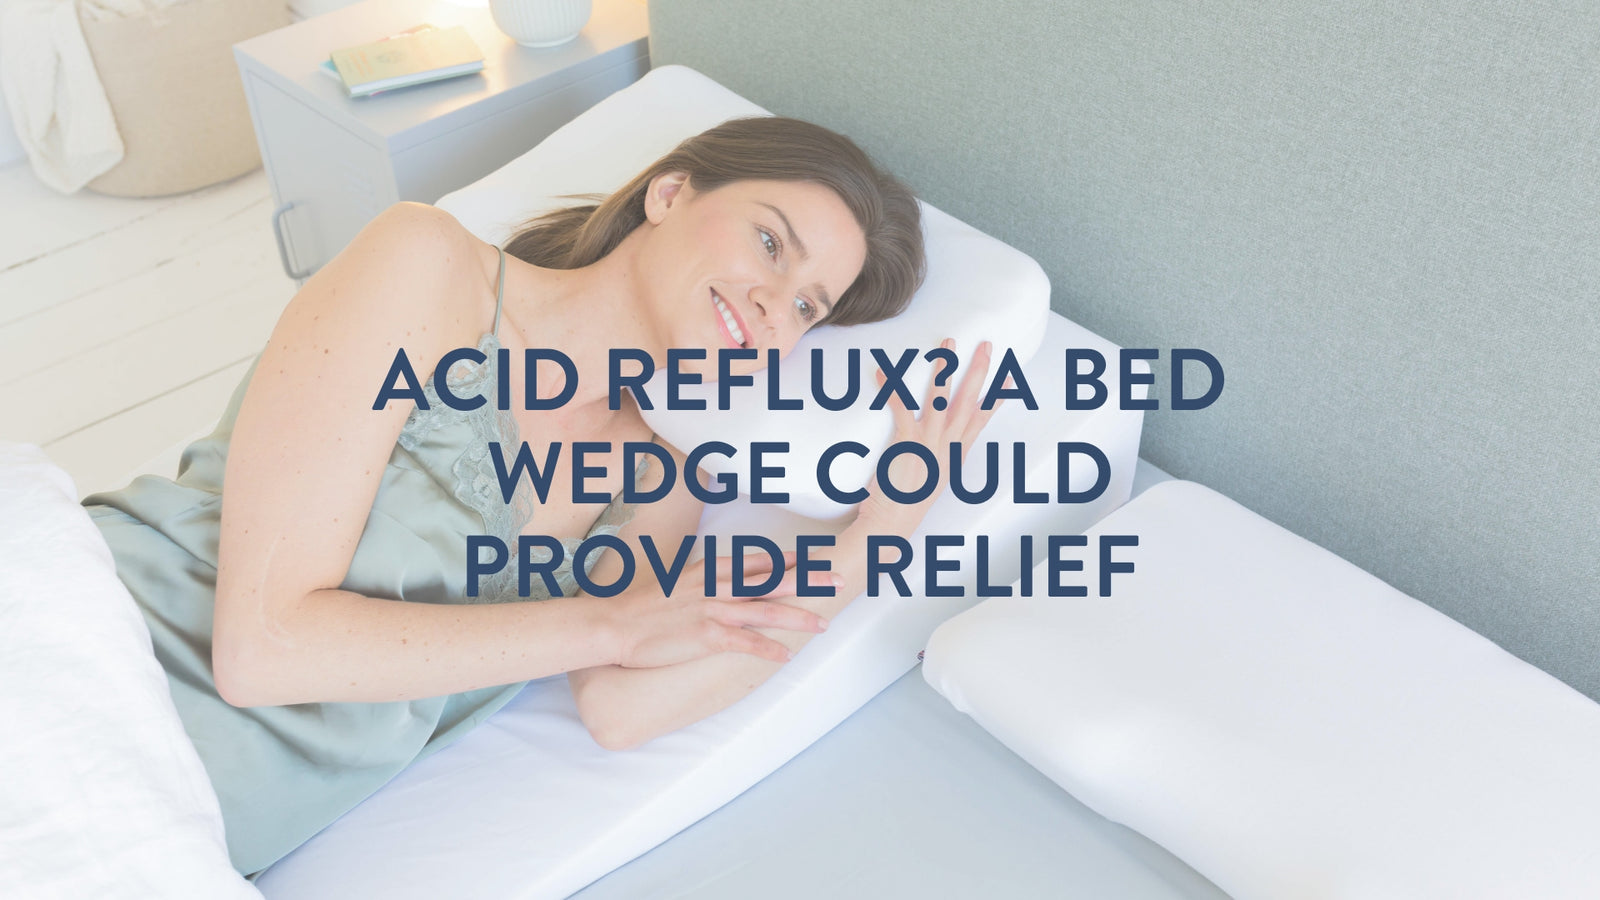 Acid reflux? A bed wedge could provide nighttime relief